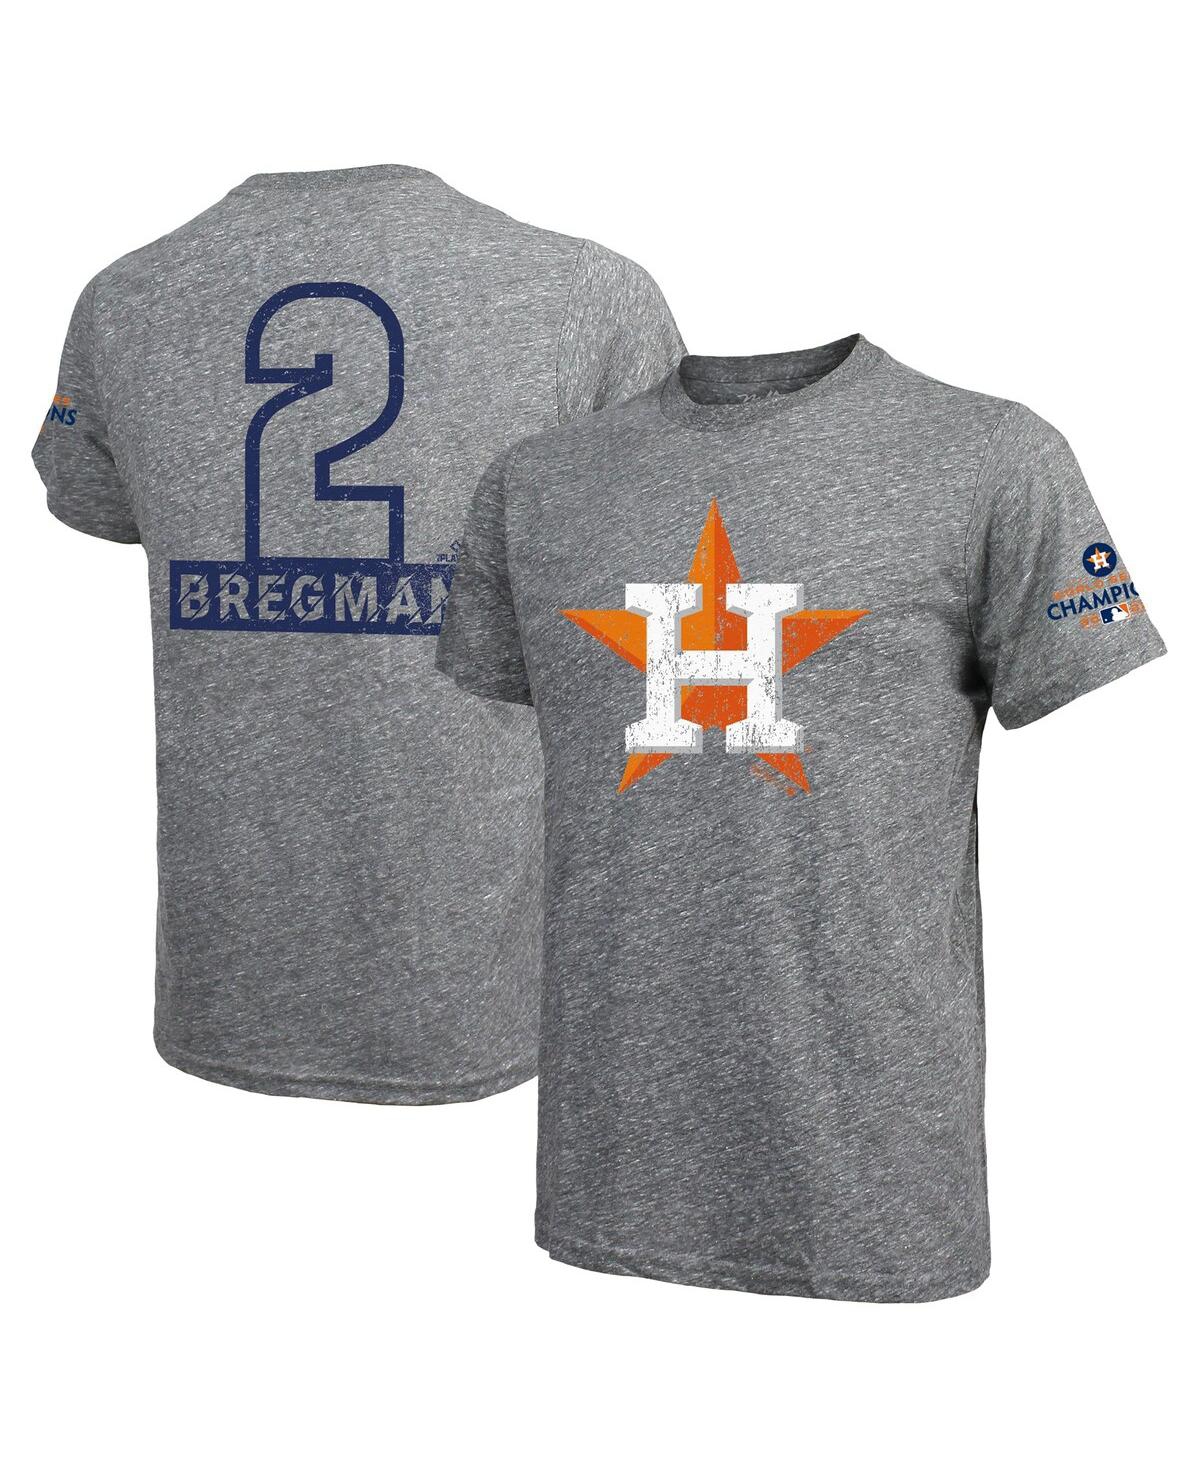 Men's Majestic Threads Alex Bregman Heather Gray Houston Astros 2022 World Series Champions Name and Number Tri-Blend T-shirt - Heather Gray